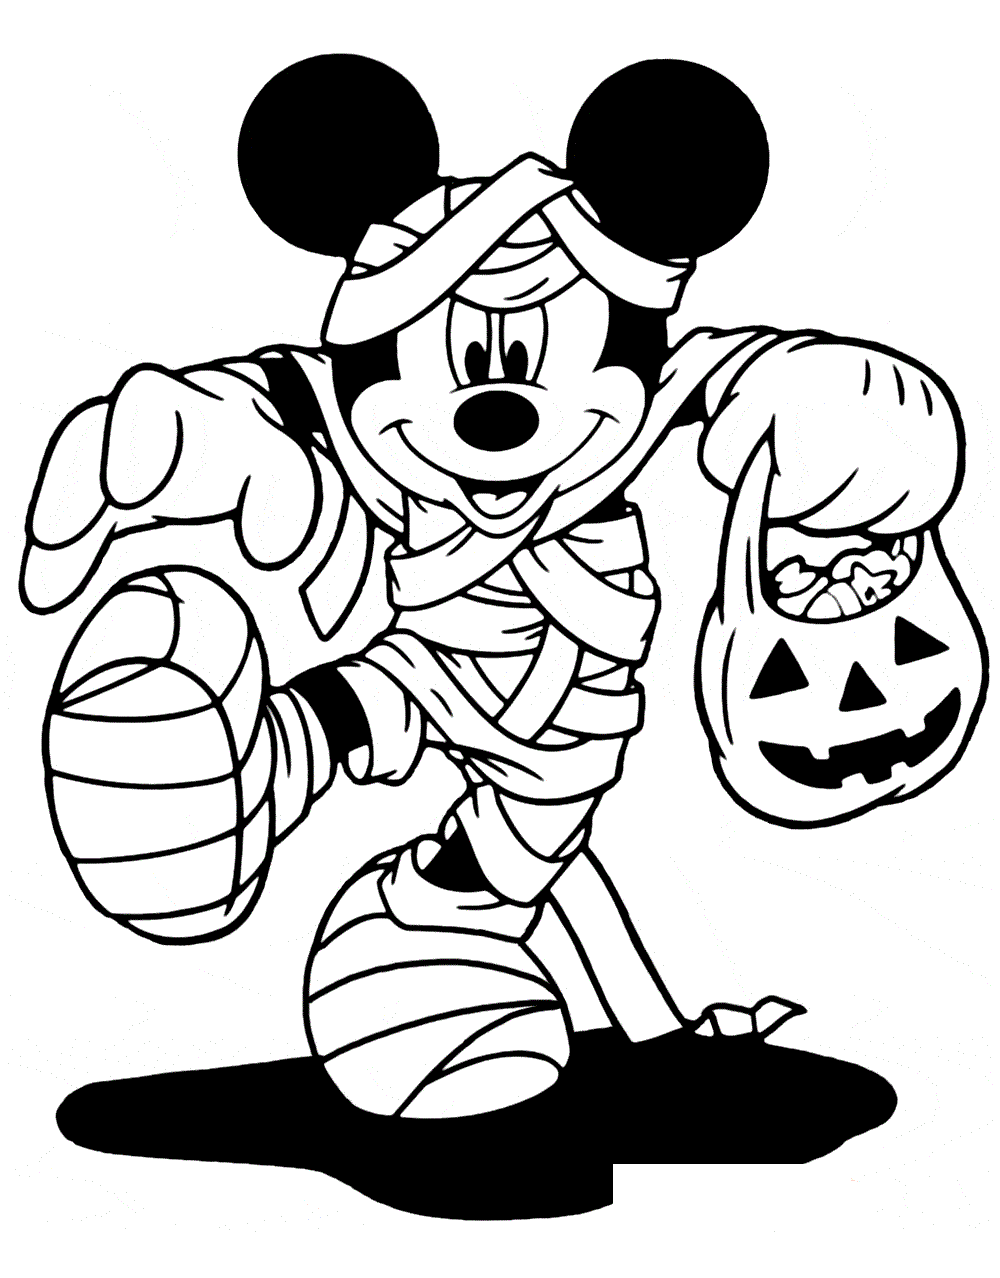 Disney Halloween Coloring Pages Best Coloring Pages For Kids